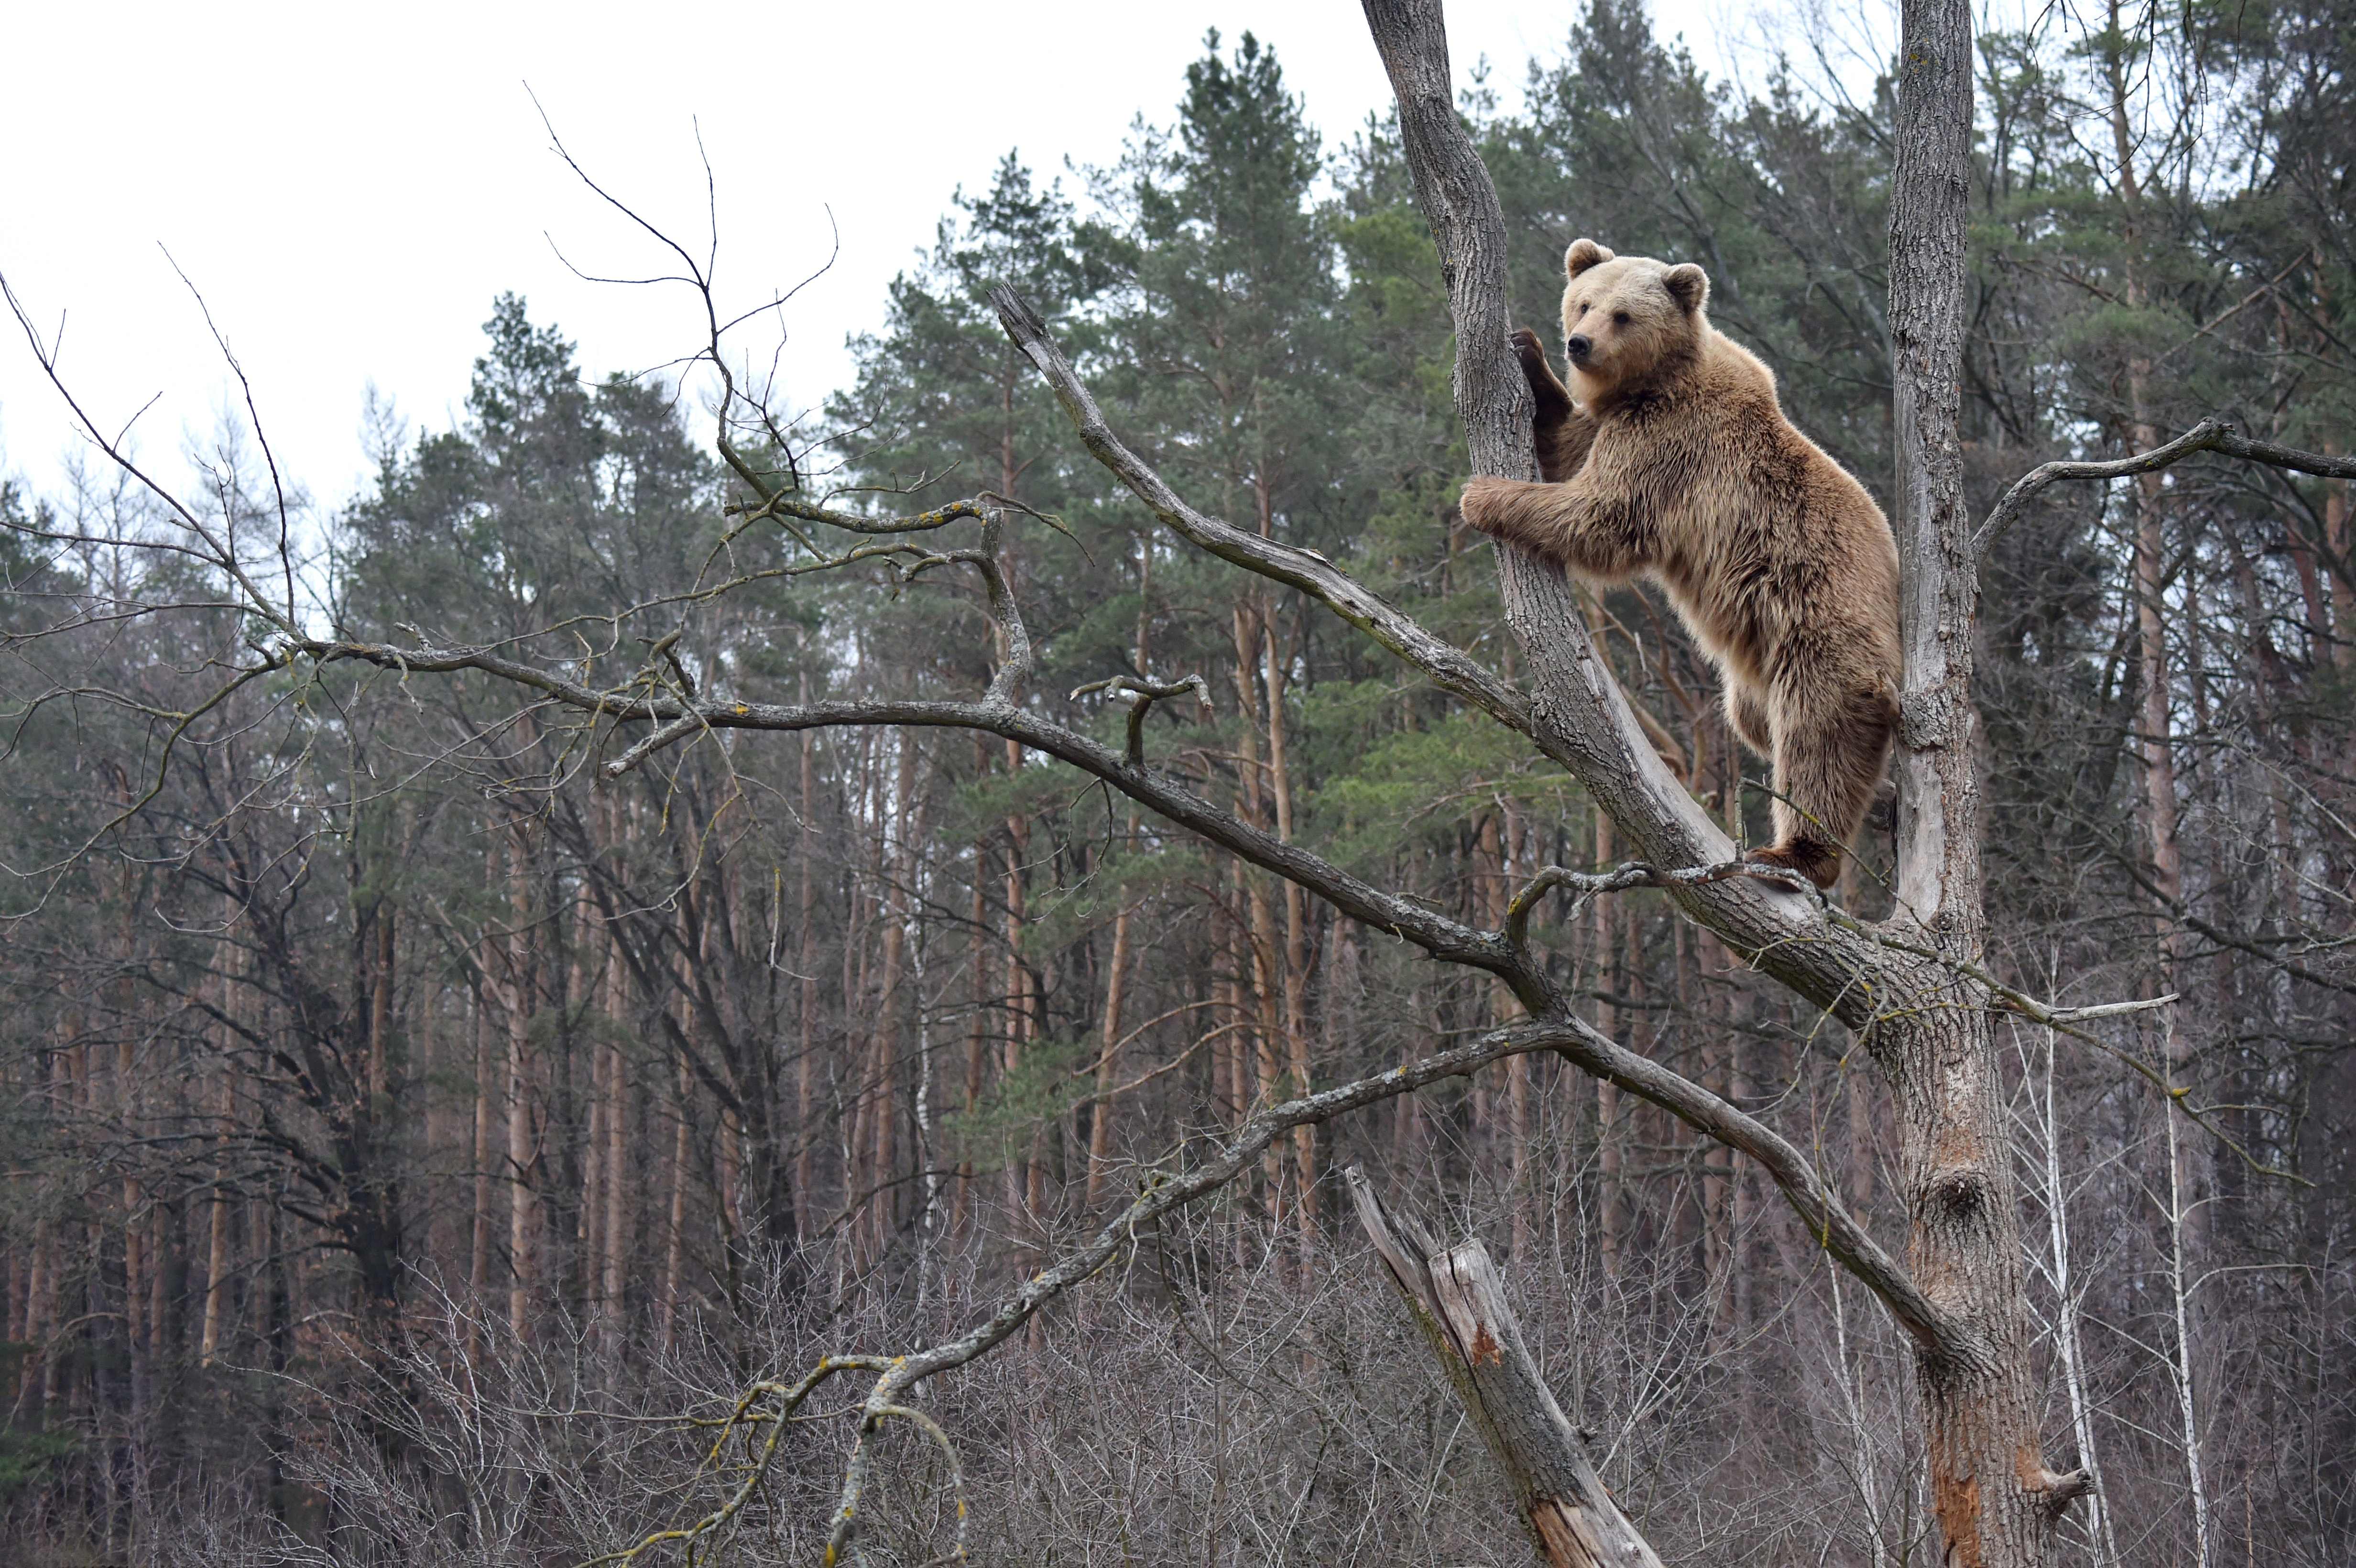 A brown bear sits on a tree in a shelter for bears rescued from circuses and private restaurants of Ukraine, near Zhytomyr, some 150 km west of Kiev, on March 24, 2017. Tortured for years by human hands these mighty animals got a chance to start it all over again in a shelter near the city of Zhytomyr, in the northwest of the country. Opened in 2012 by international animal charity Four Paws, the rescue centre soon became one of the biggest sights of the region. / AFP PHOTO / Sergei SUPINSKY